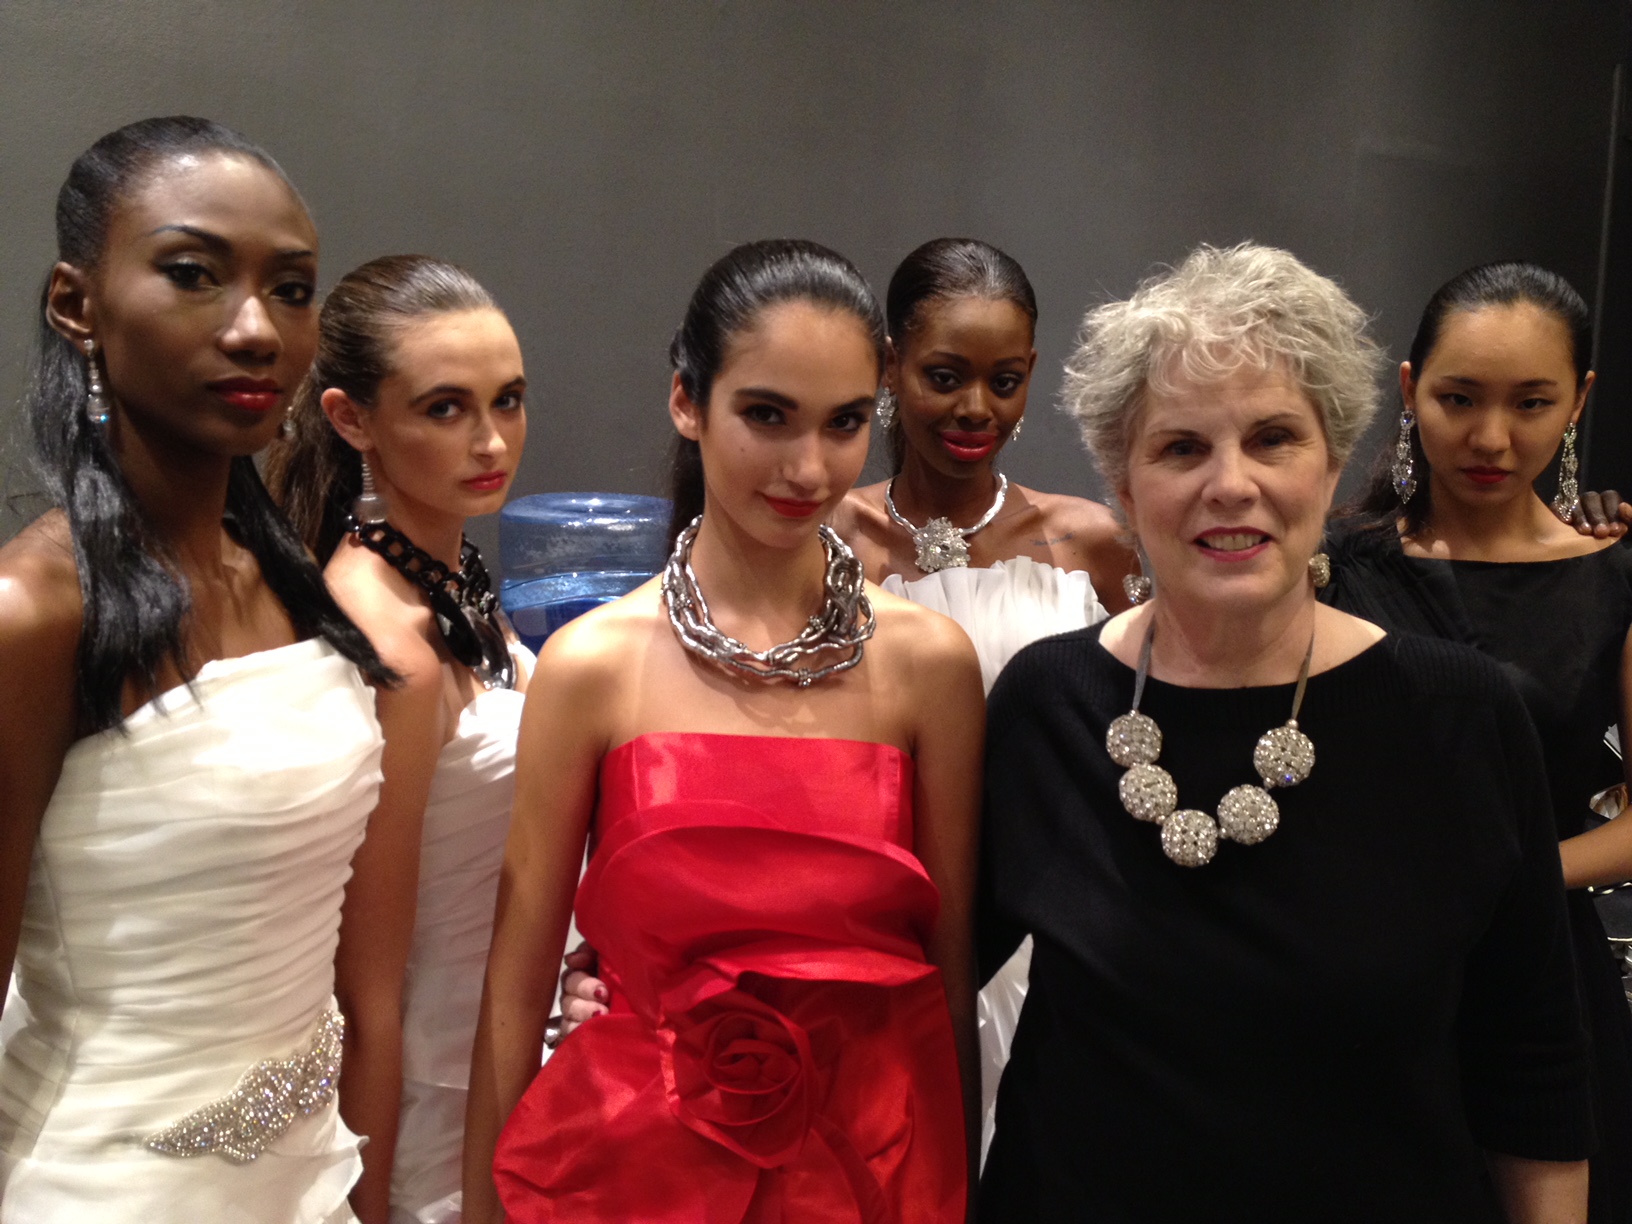 Fashion Collection Colors of Tango. Behind the scenes Washington DC Fashion Week